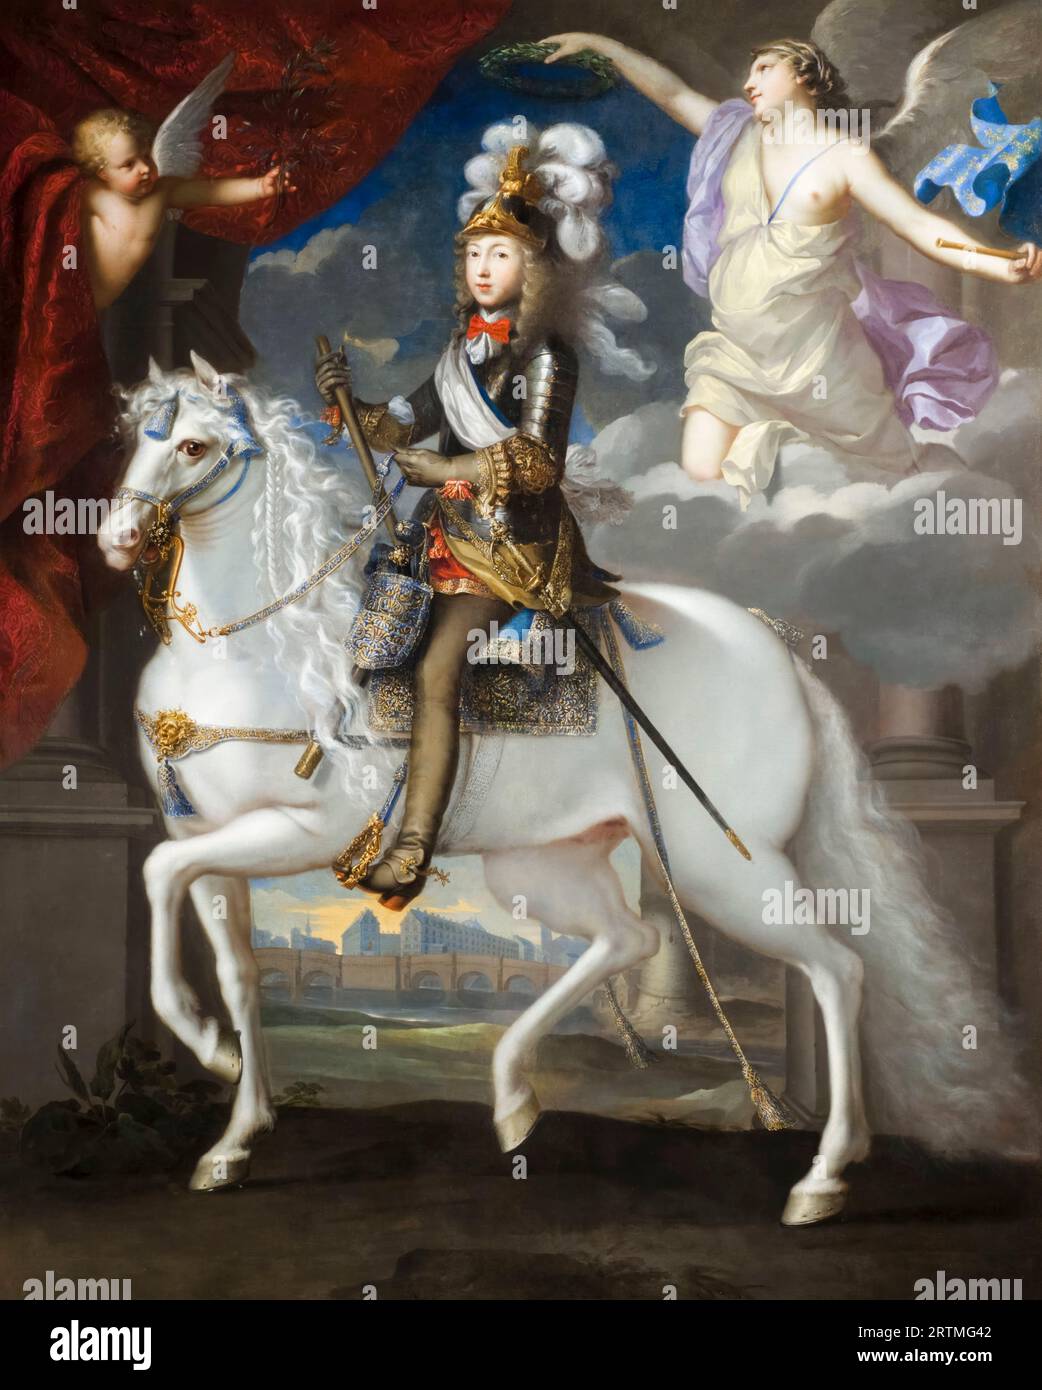 Louis XIV (1638-1715), King of France, equestrian portrait in oil on canvas by Jean Nocret (attributed), circa 1653 Stock Photo